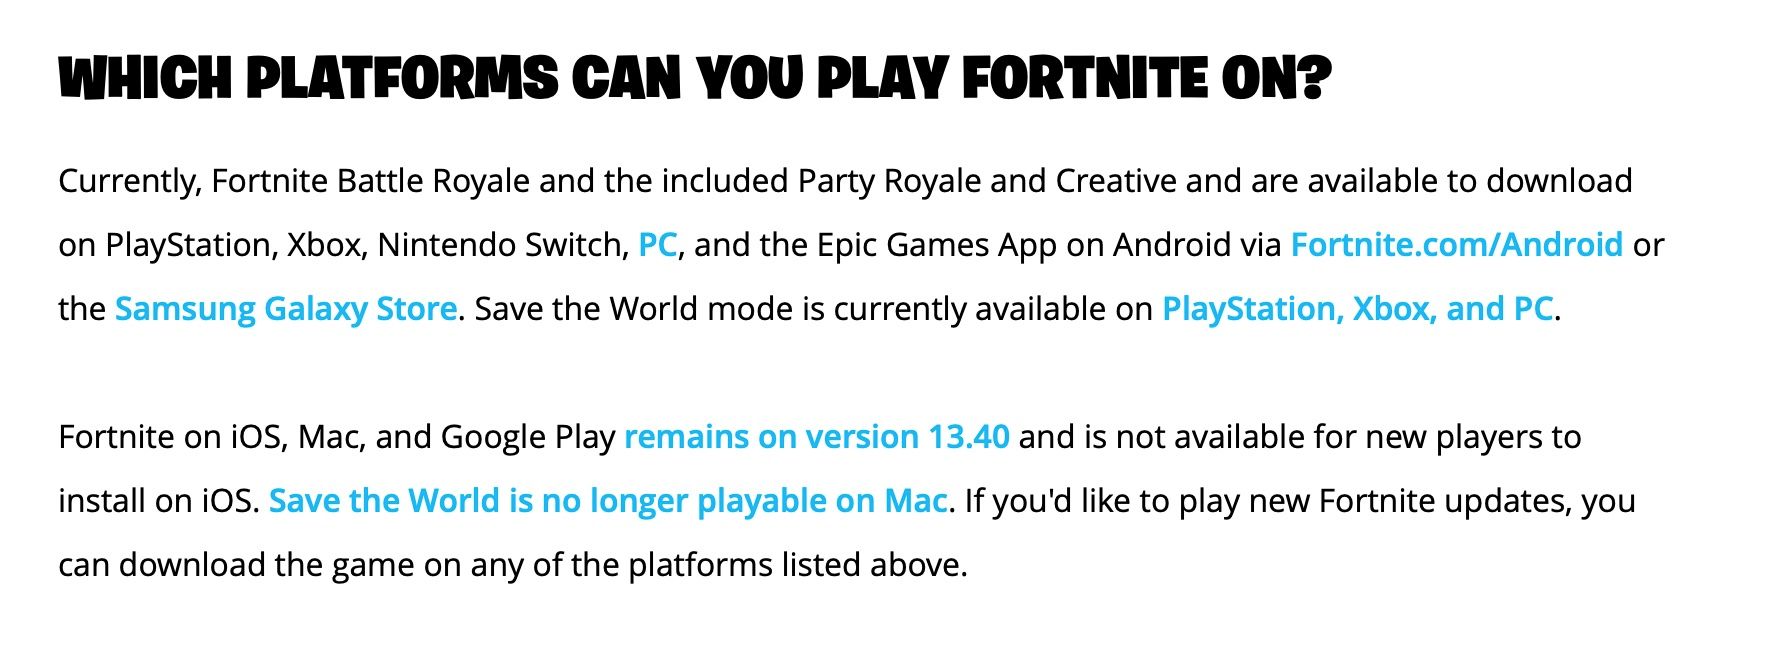 Platforms where Fortnite Is Available